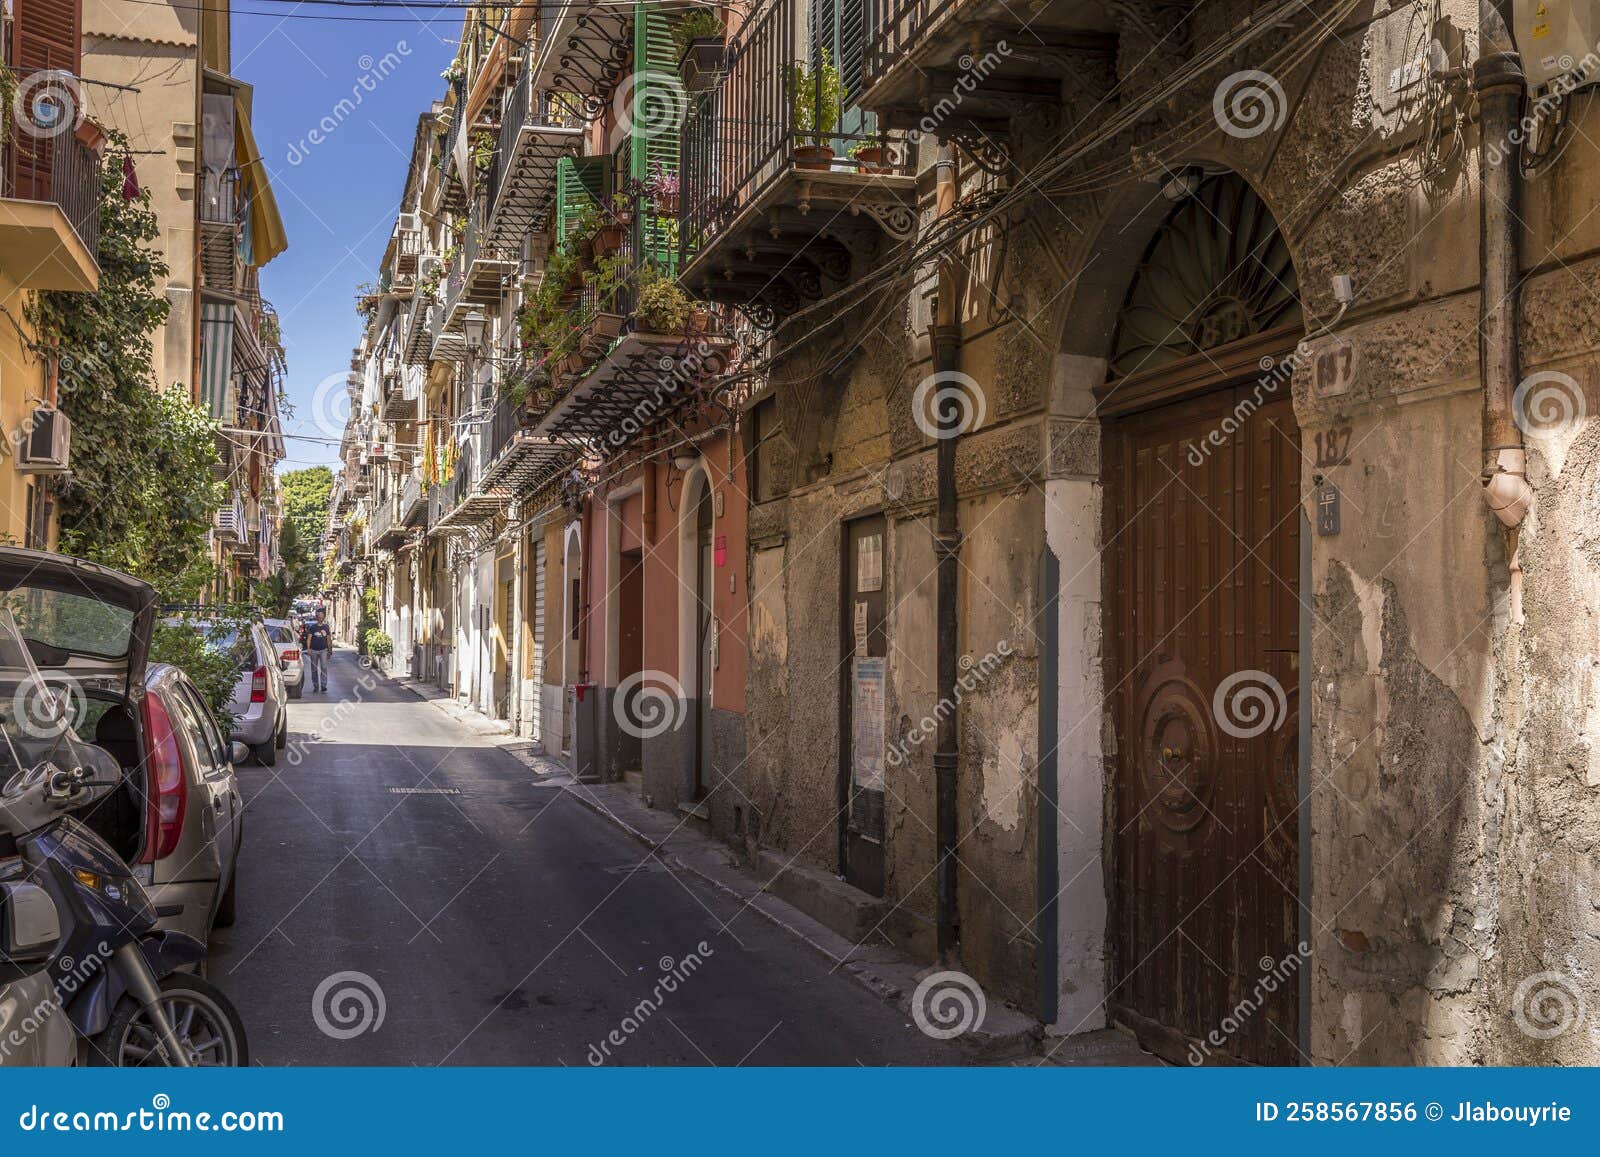 Typical Italian Street and Buildings in the Old Town of Palermo, Sicily ...